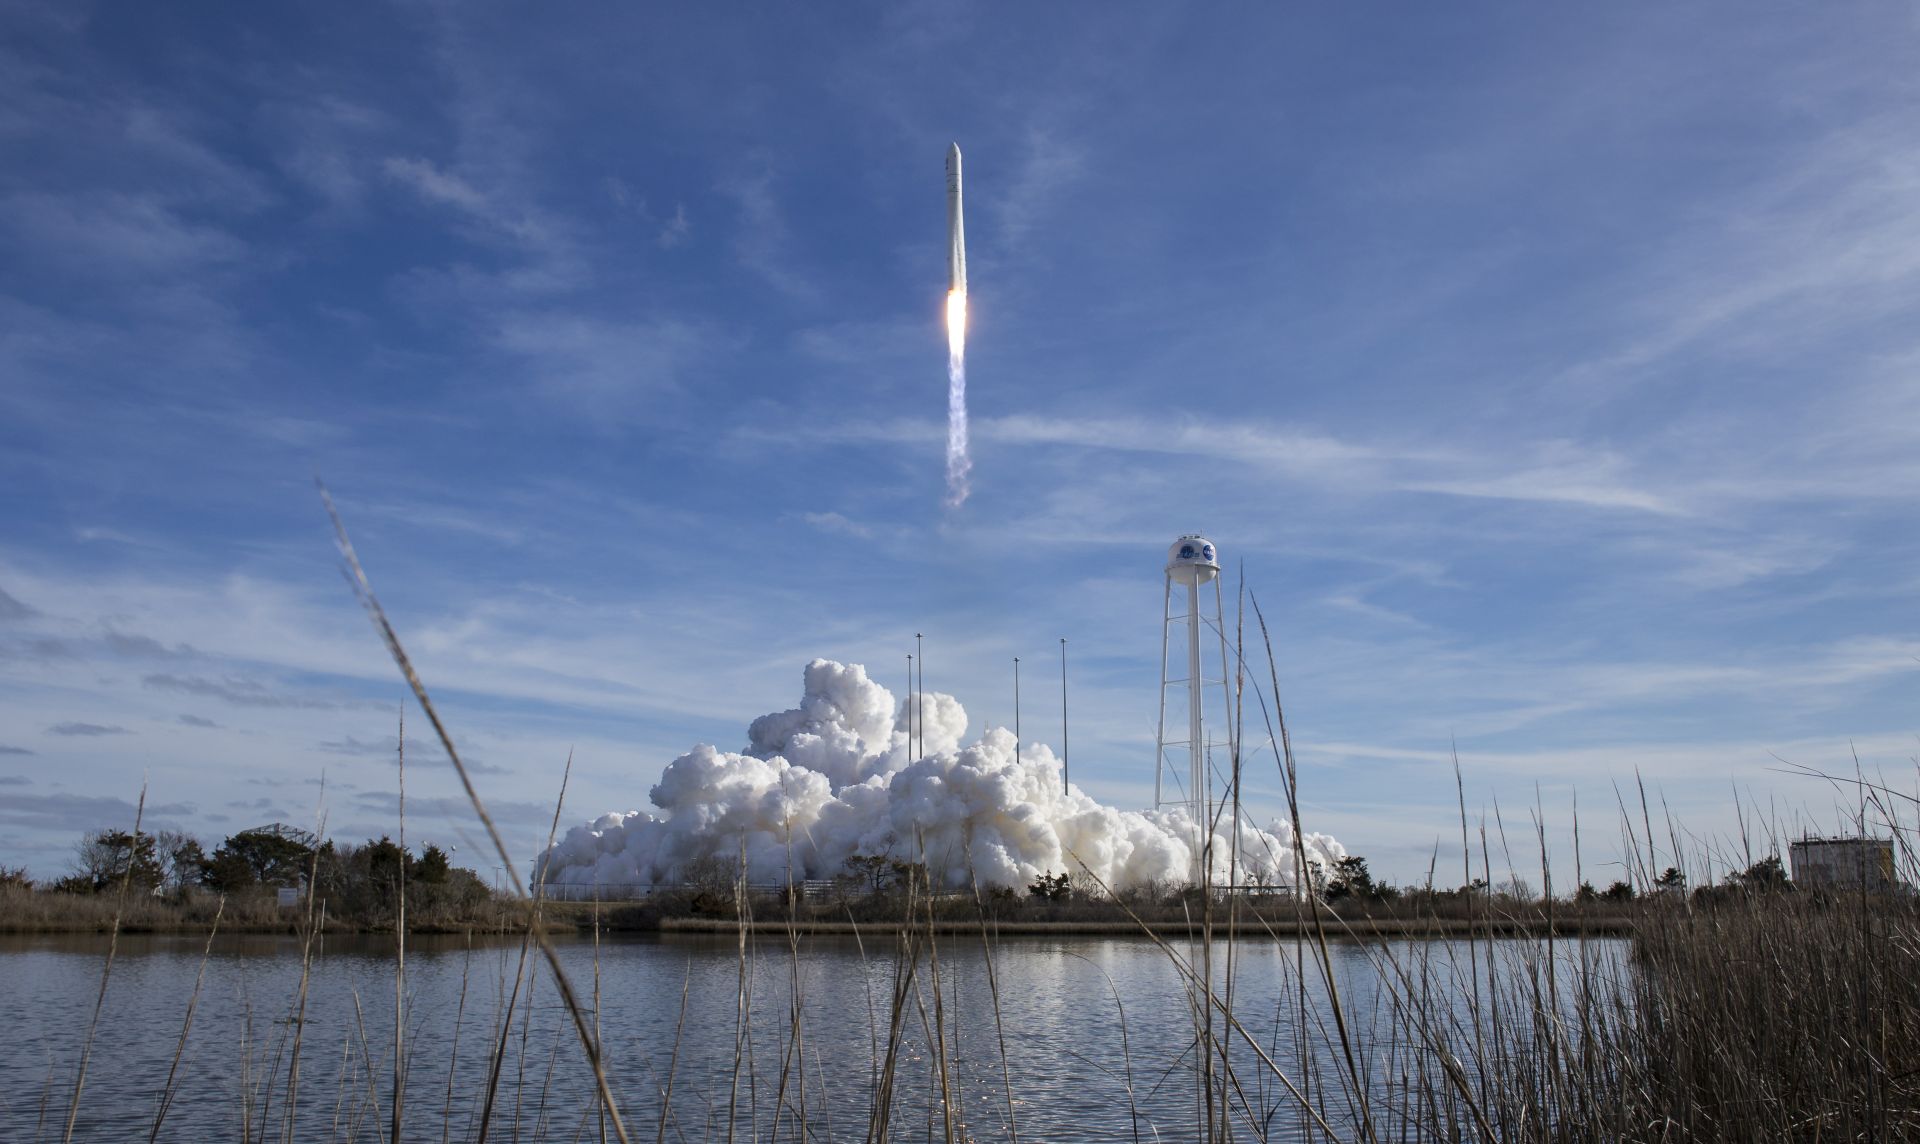 epa08220845 A handout photo made available by NASA shows the Northrop Grumman Antares rocket, with Cygnus resupply spacecraft onboard, launches from Pad-0A, at NASA's Wallops Flight Facility in Virginia, USA, 15 February 2020. Northrop Grumman's 13th contracted cargo resupply mission for NASA to the International Space Station will deliver more than 7,500 pounds of science and research, crew supplies and vehicle hardware to the orbital laboratory and its crew.  EPA/AUBREY GEMIGNANI / NASA / HANDOUT  MANDATORY CREDIT HANDOUT EDITORIAL USE ONLY/NO SALES